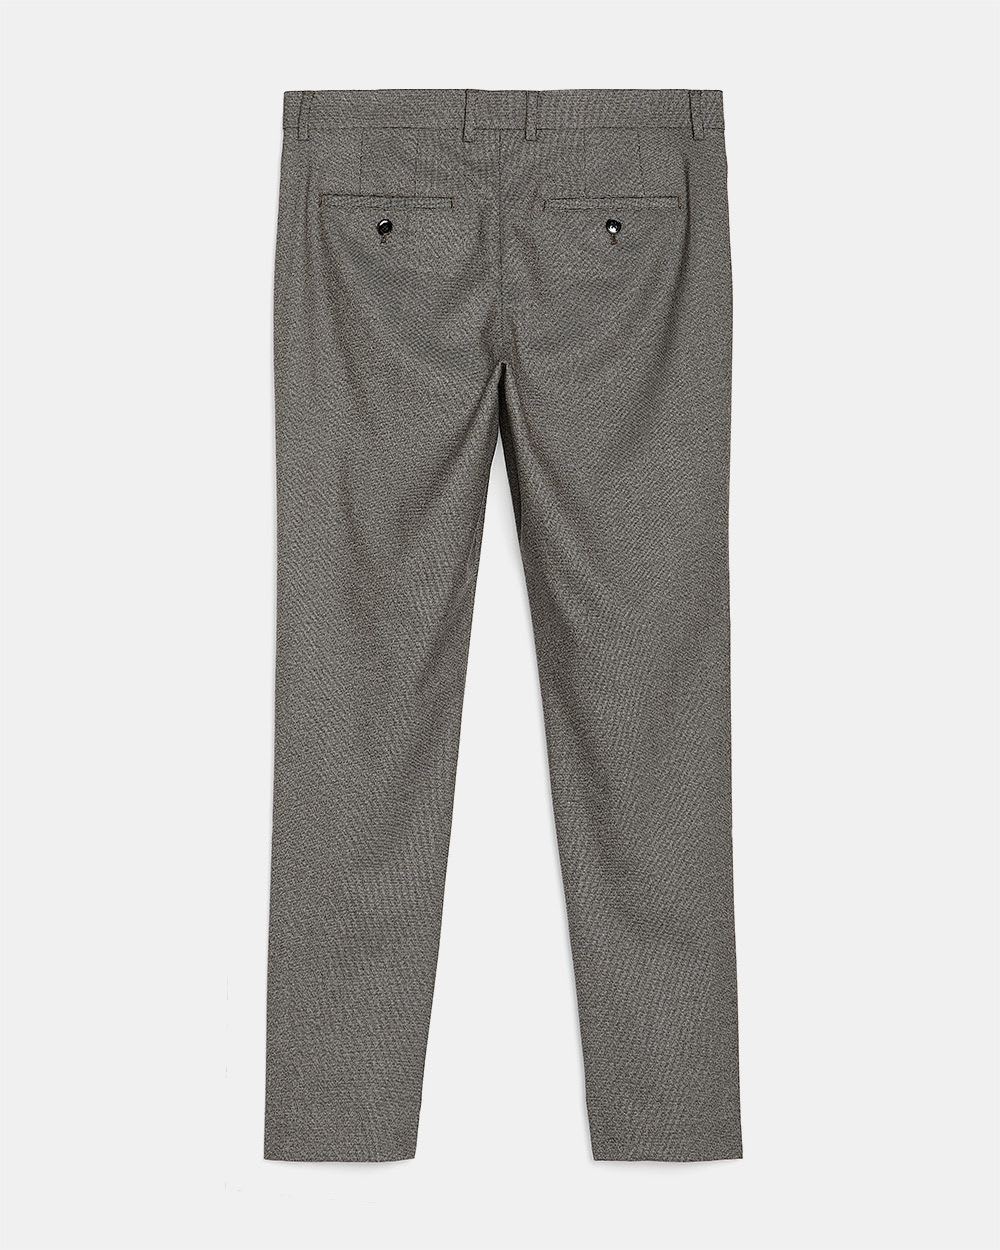 40-Hours Slim Fit Brown Houndstooth City Pant - 32"